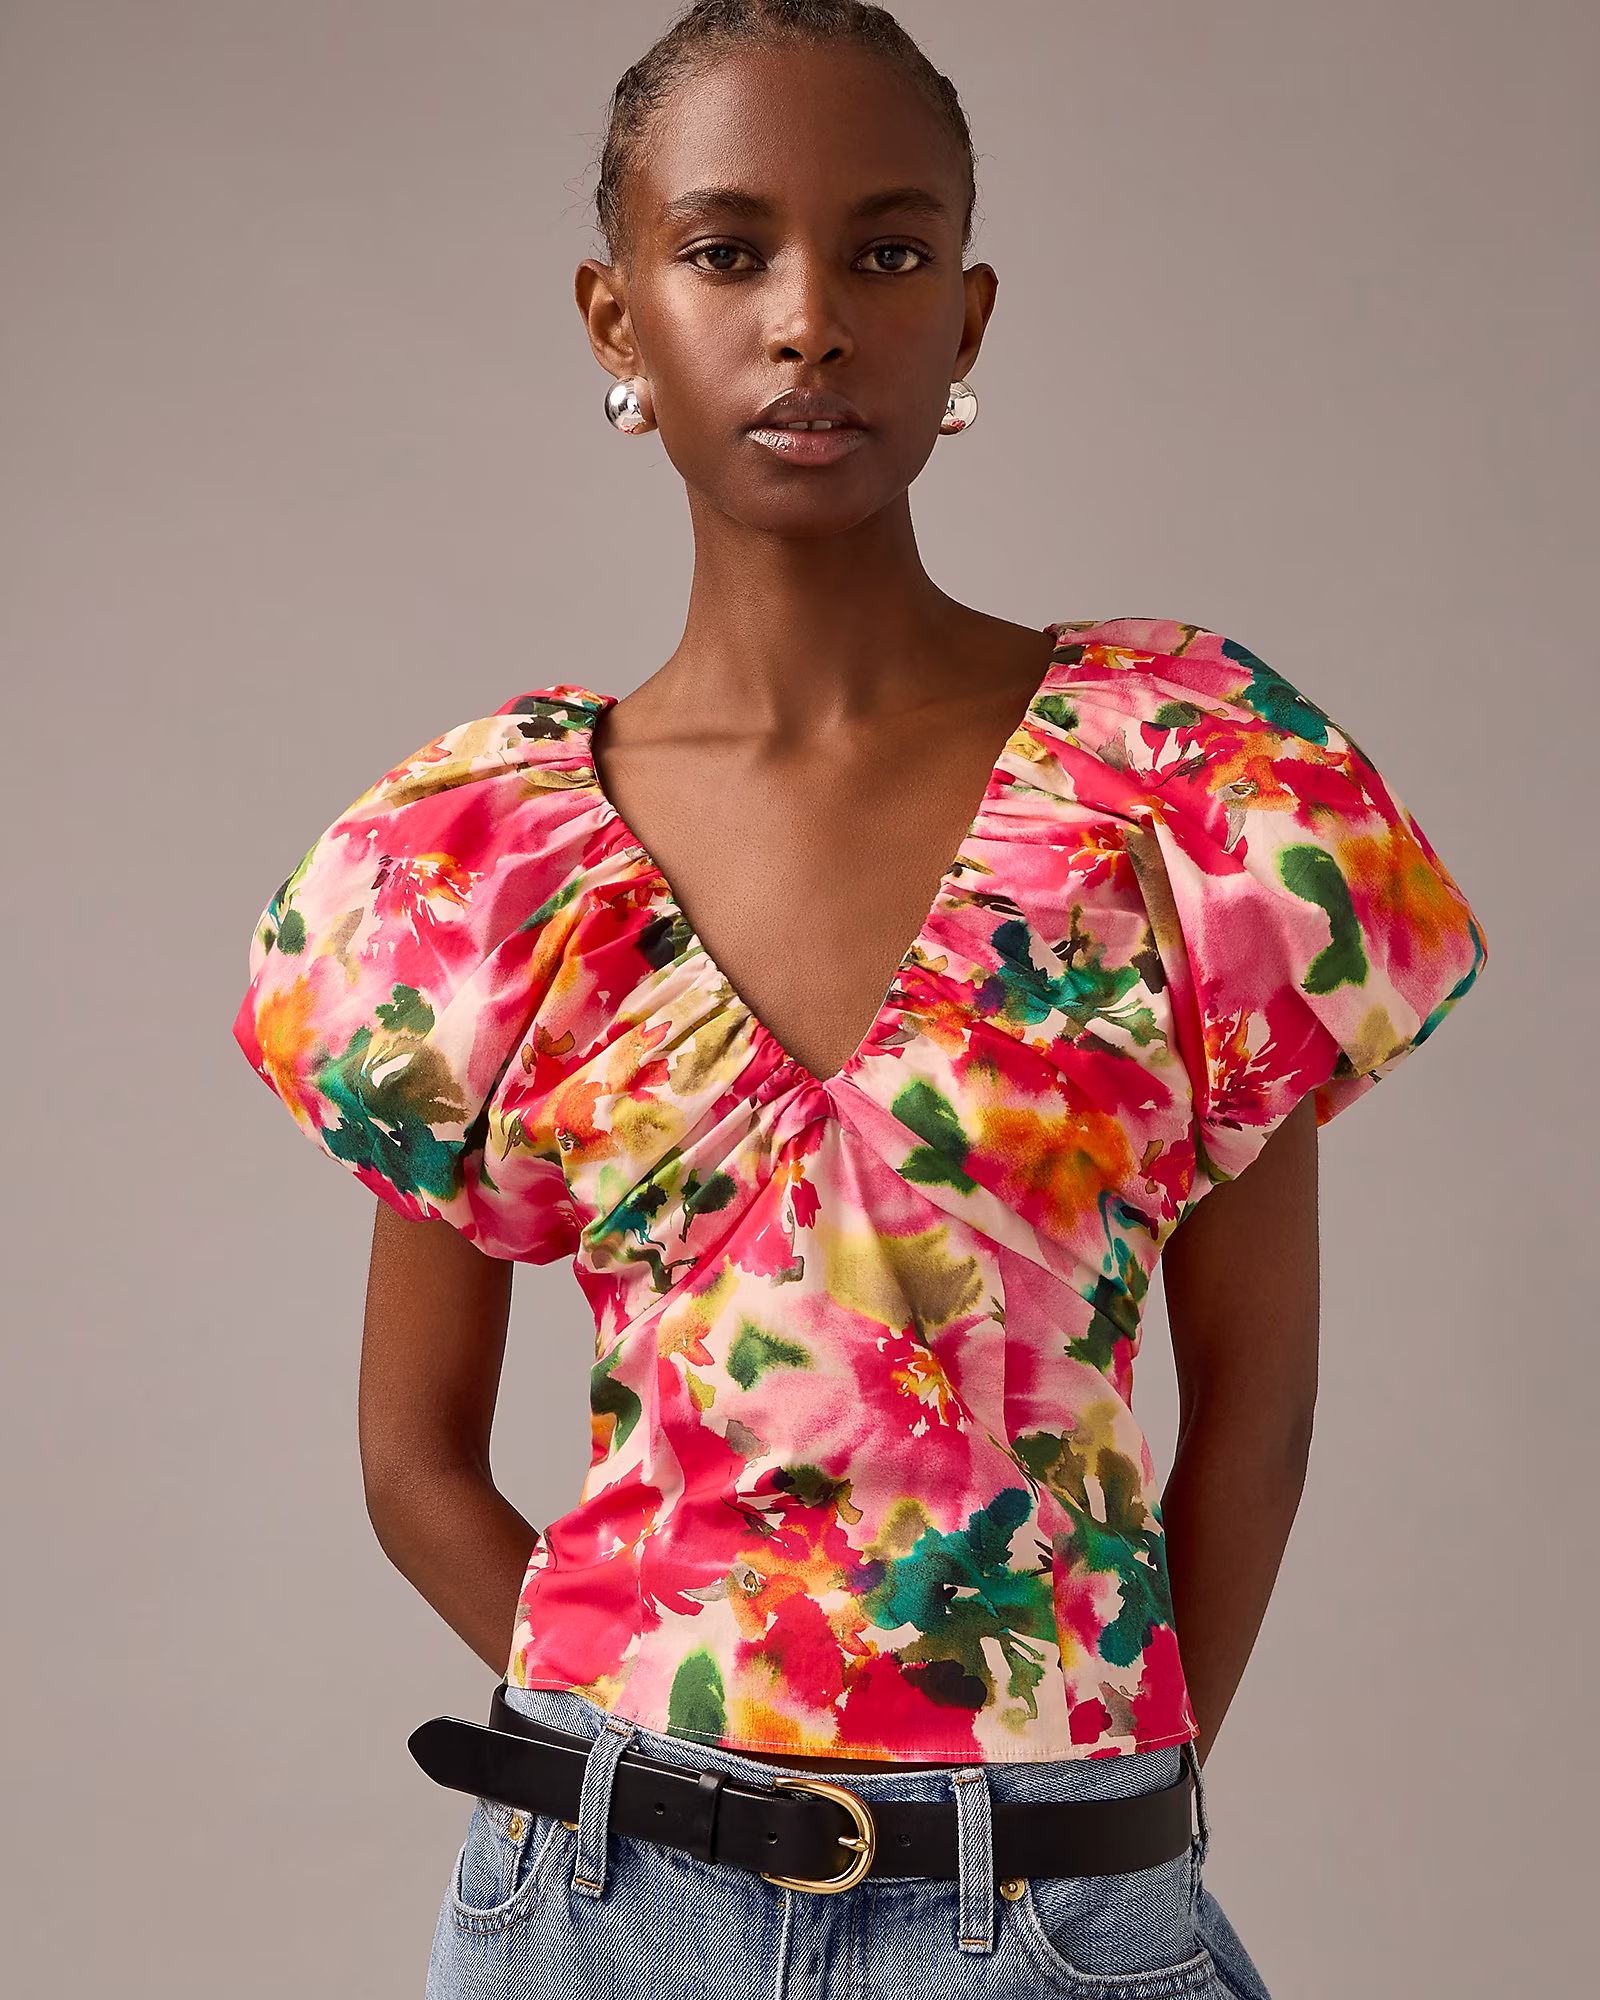 Cecily top in floral stretch cotton poplin blend | J.Crew US